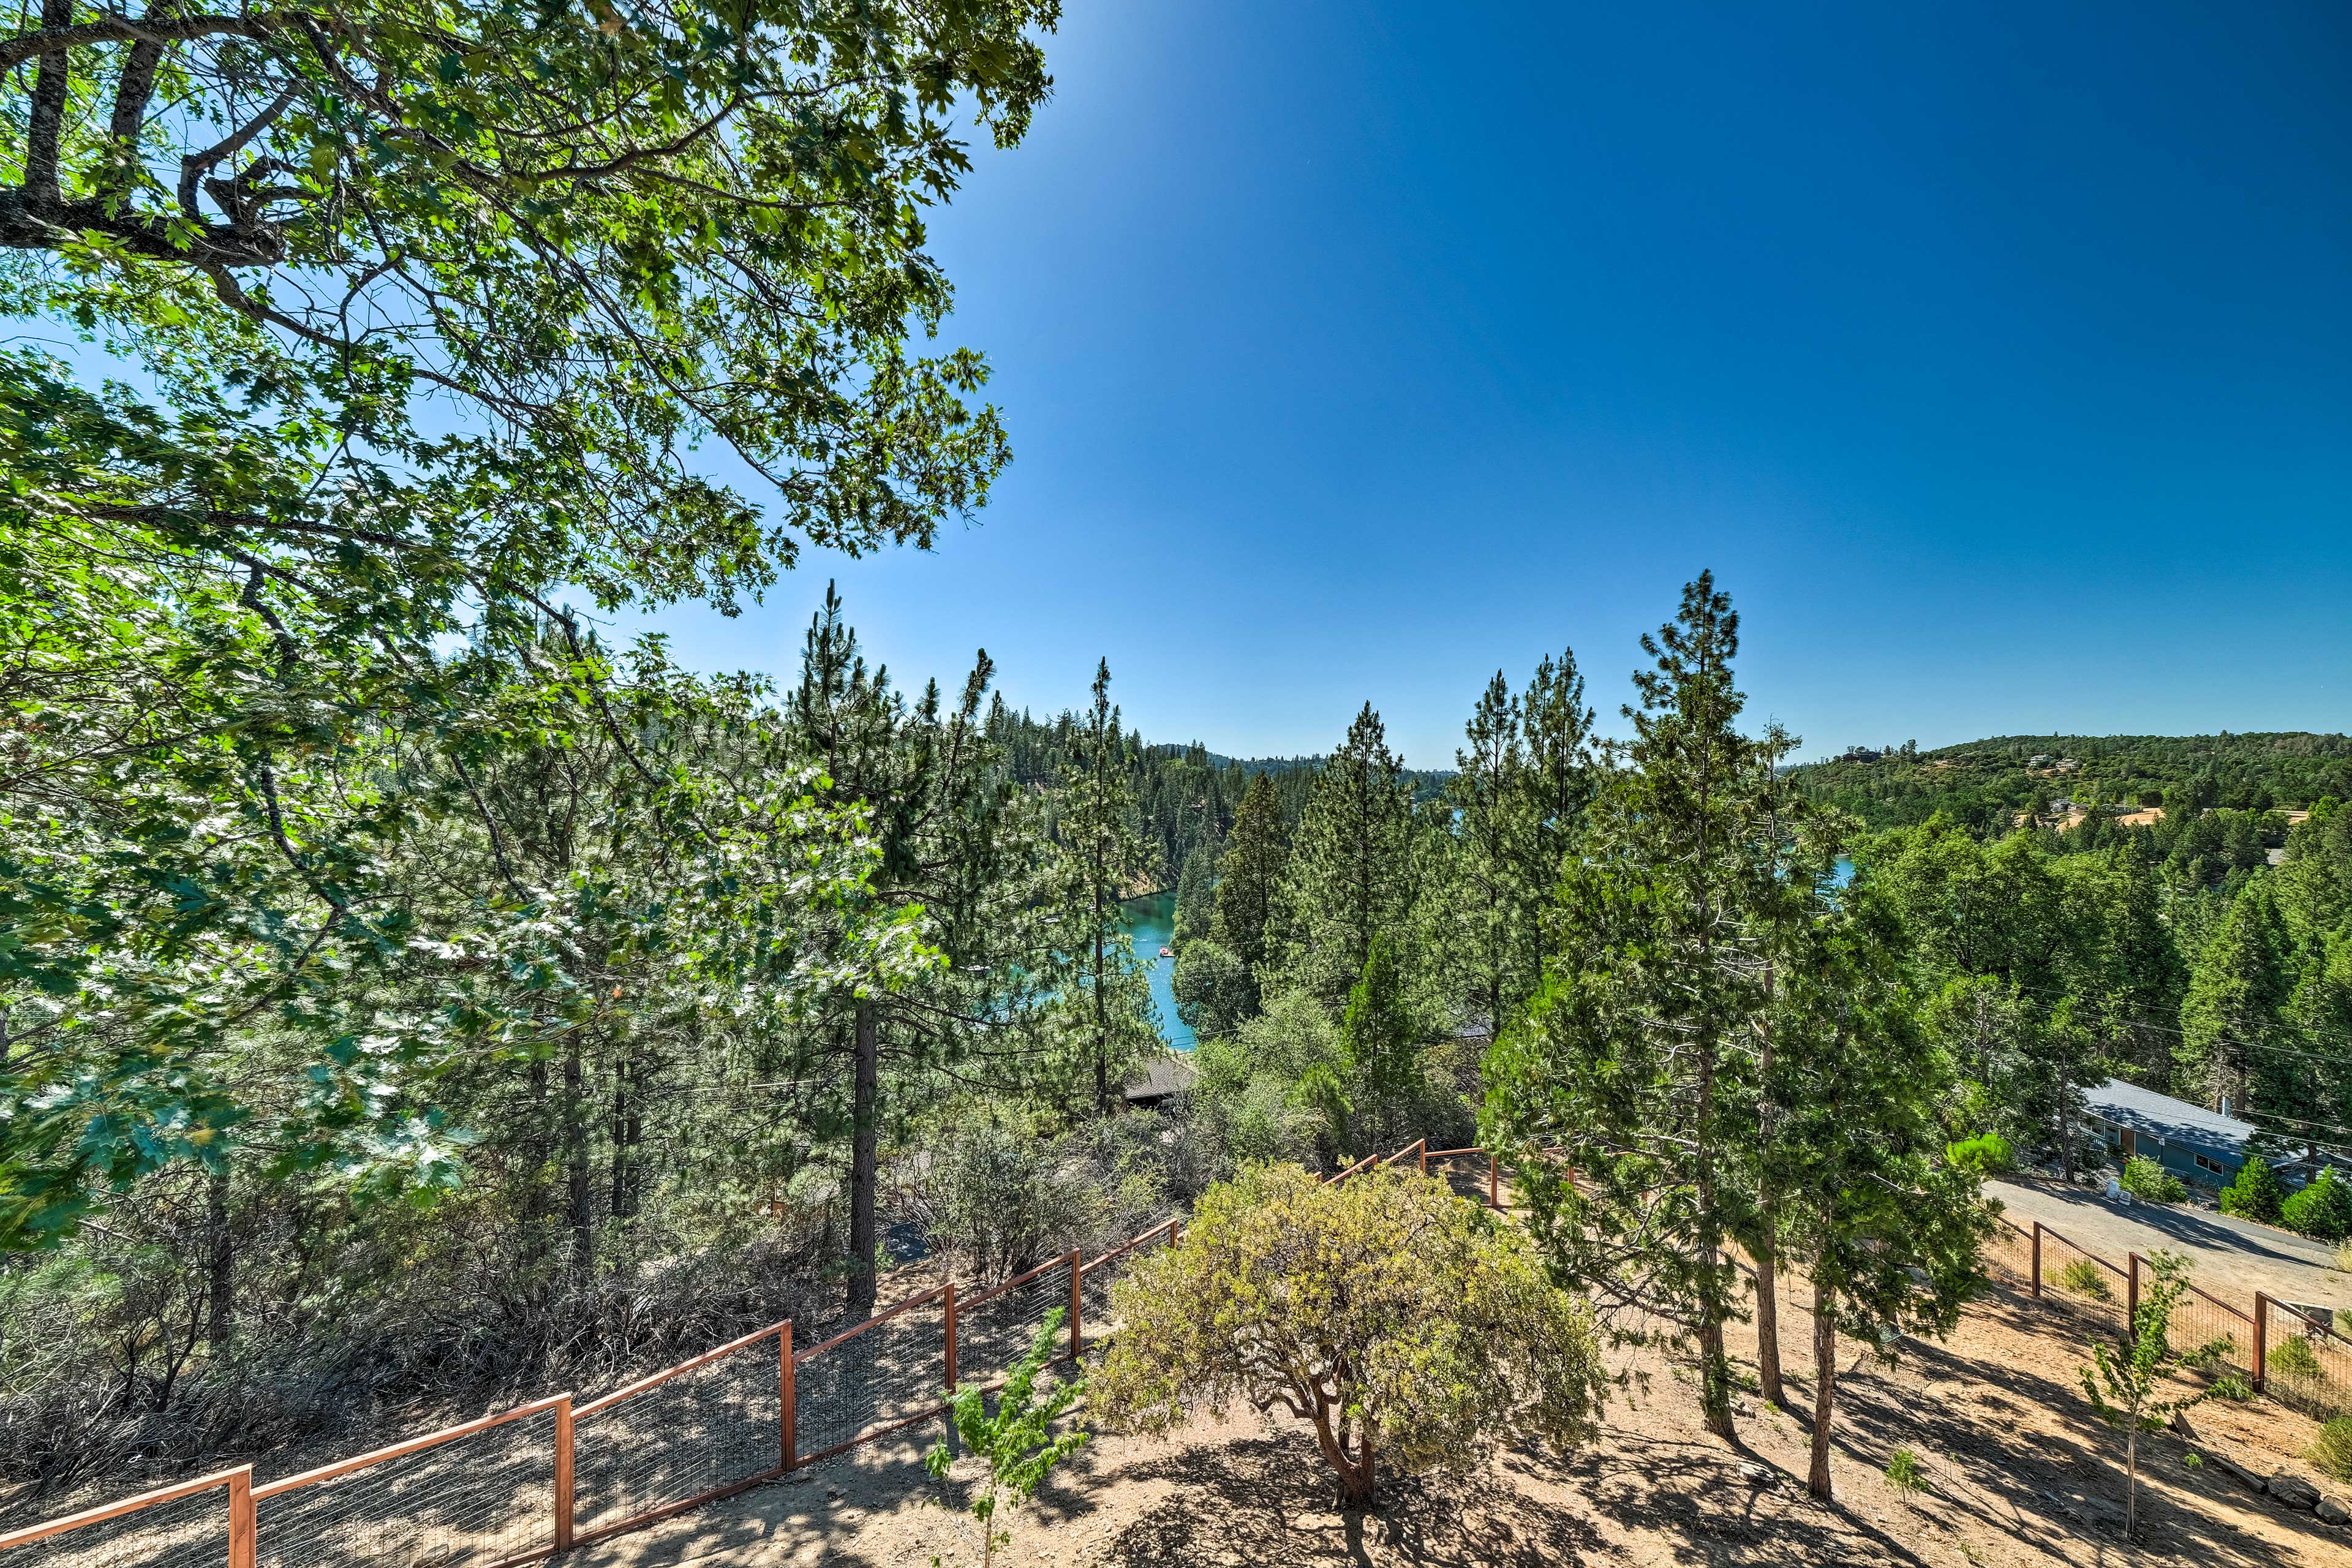 View of a forest in Groveland, CA with water showing through the trees and blue skies overhead